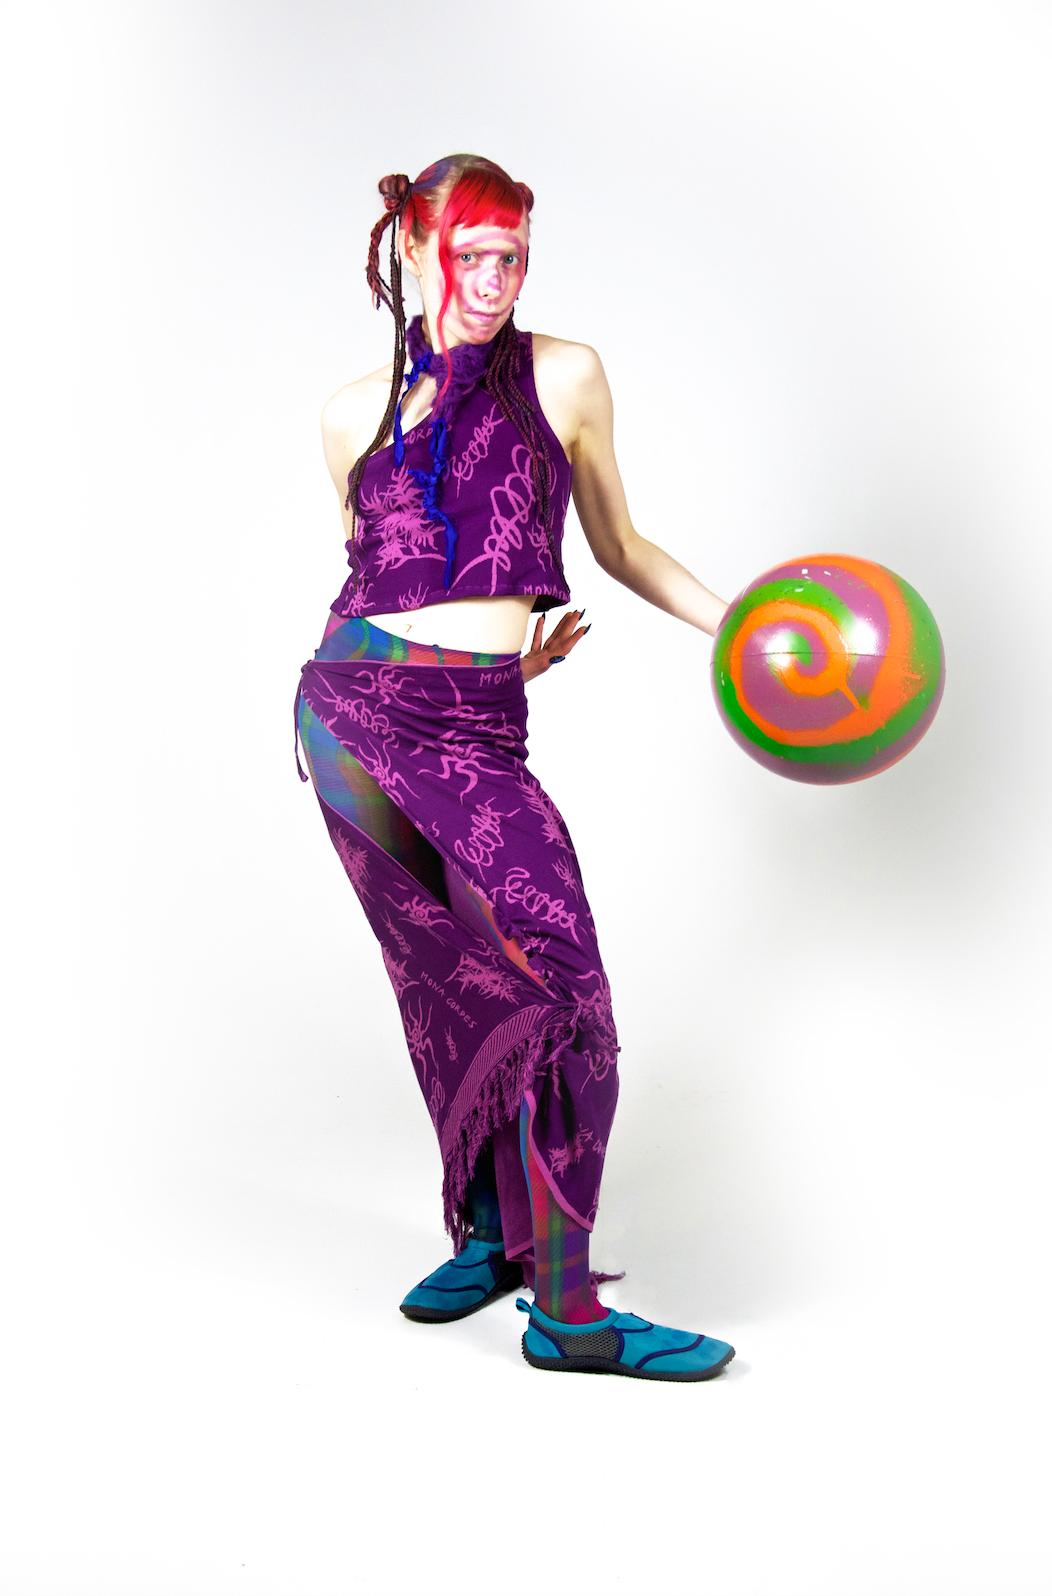 Model is standing with one leg bent and wearing a purple, printed two piece outfit. The top is a cropped tank top, and the bottom is a long skirt that hits right above the shoes. The model has colorful orange, pink and purple hair pulled back into a sleek bun with strands flowing out. The print of the dark purple outfit contains light, vibrant purplish pink squiggles and drawings that resemble bugs with long legs and leafy plants.